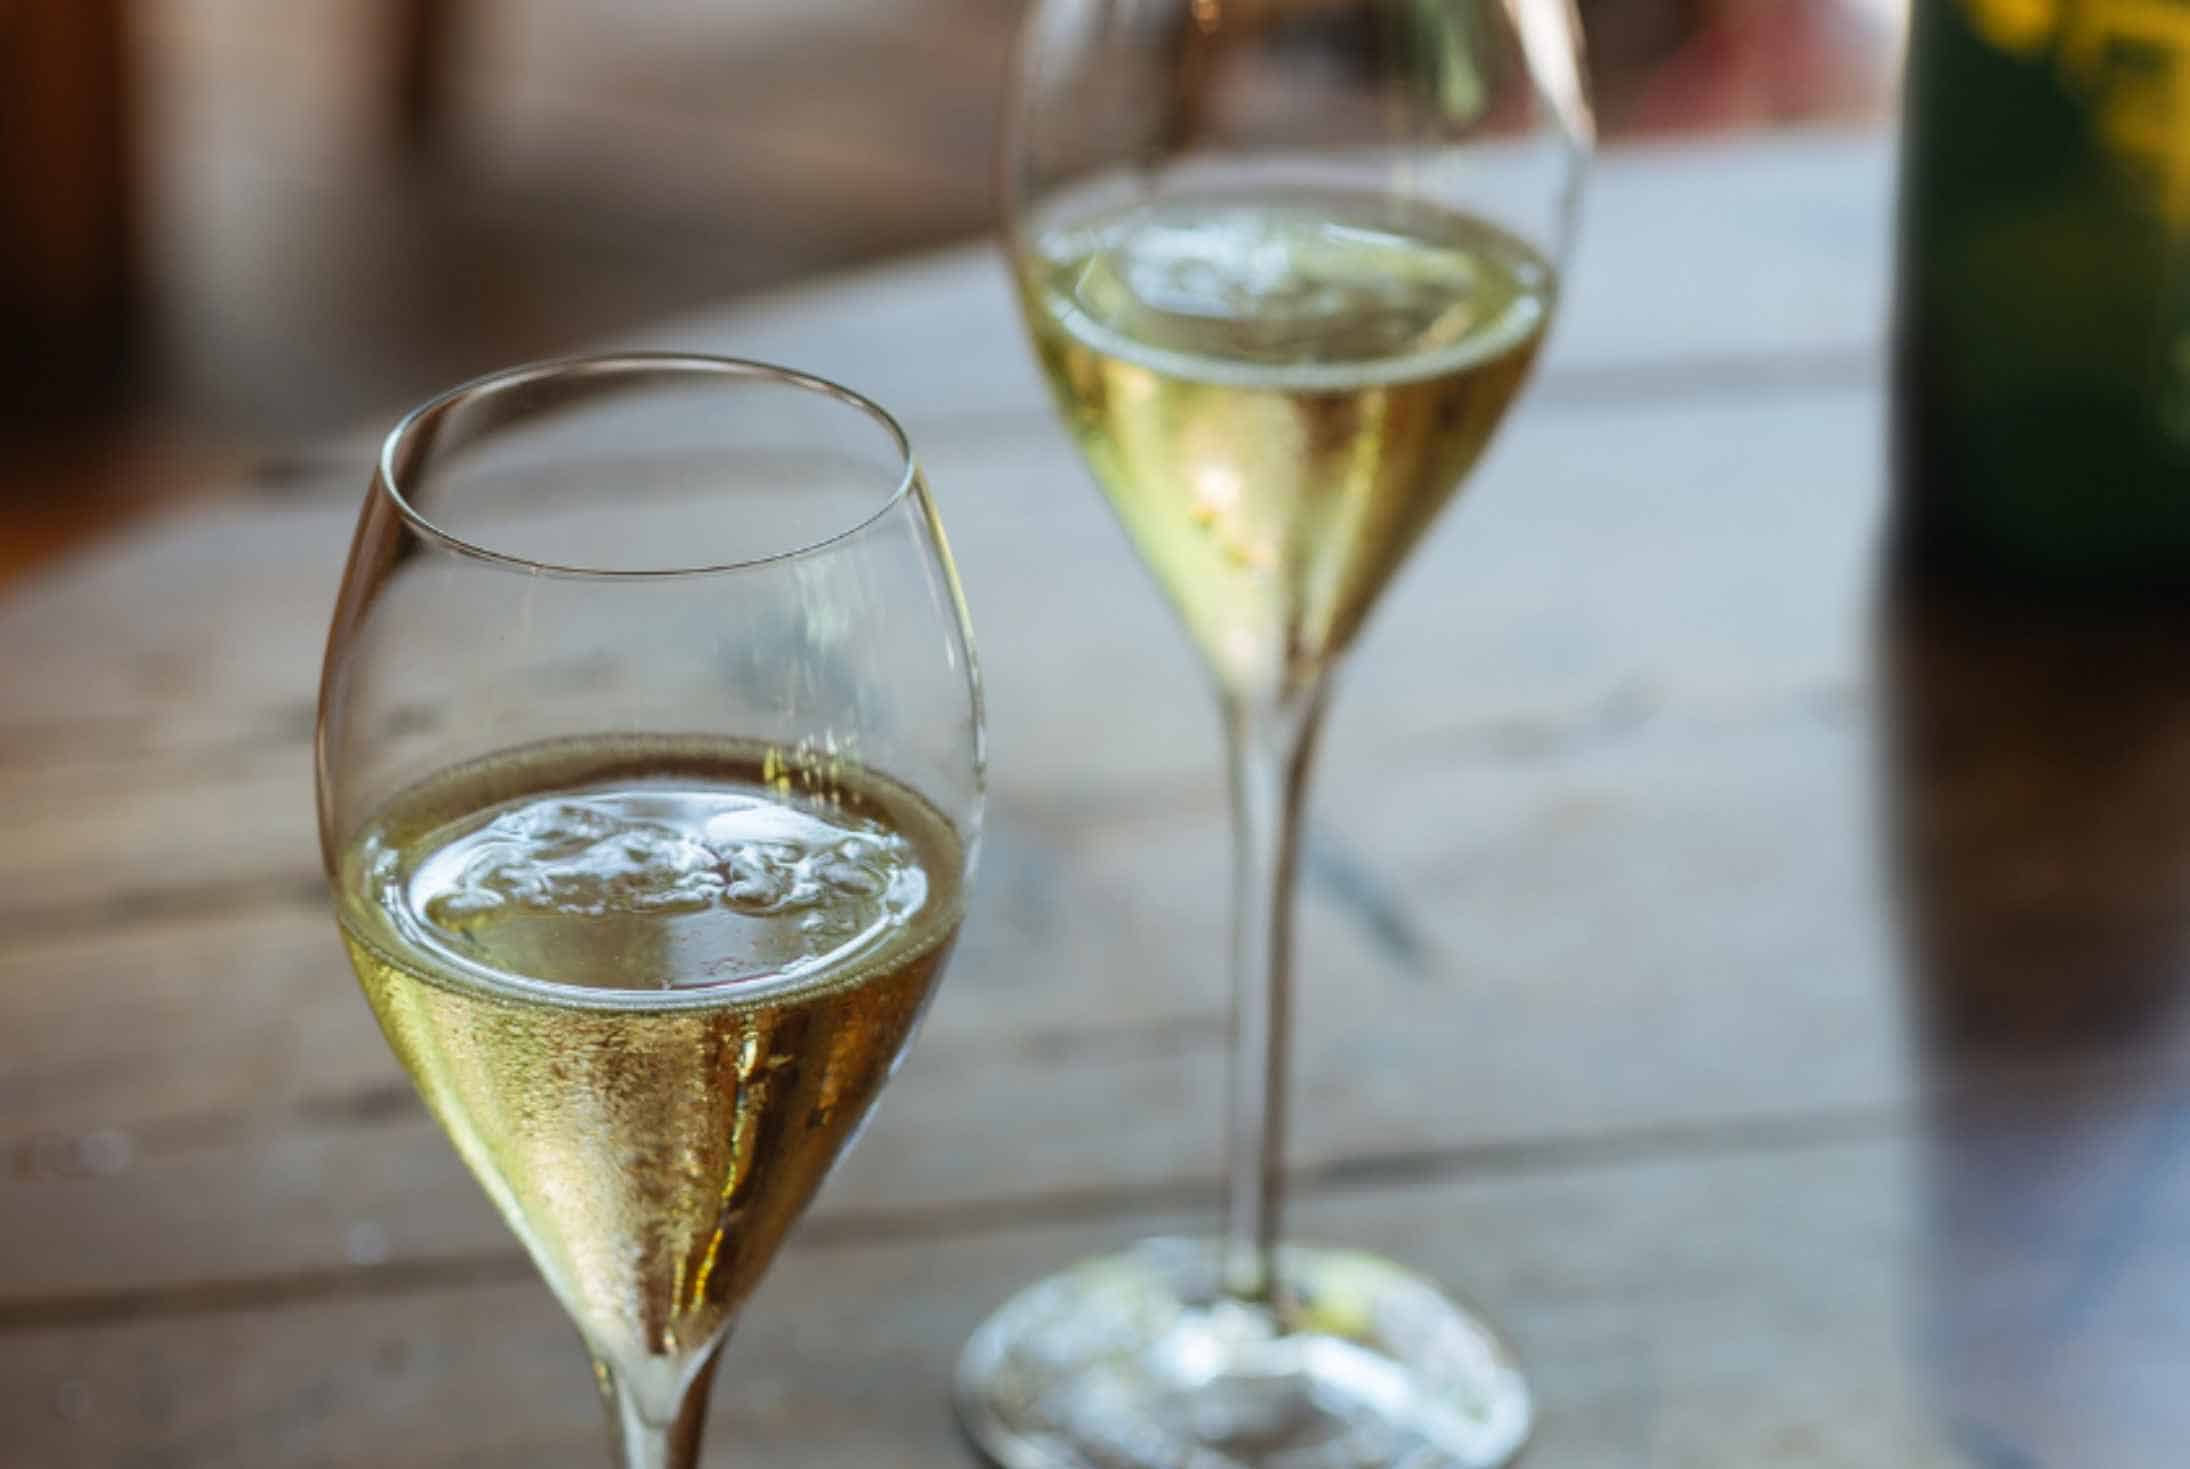 Prosecco Wine Guide History, Taste, Types, Making, Pairings